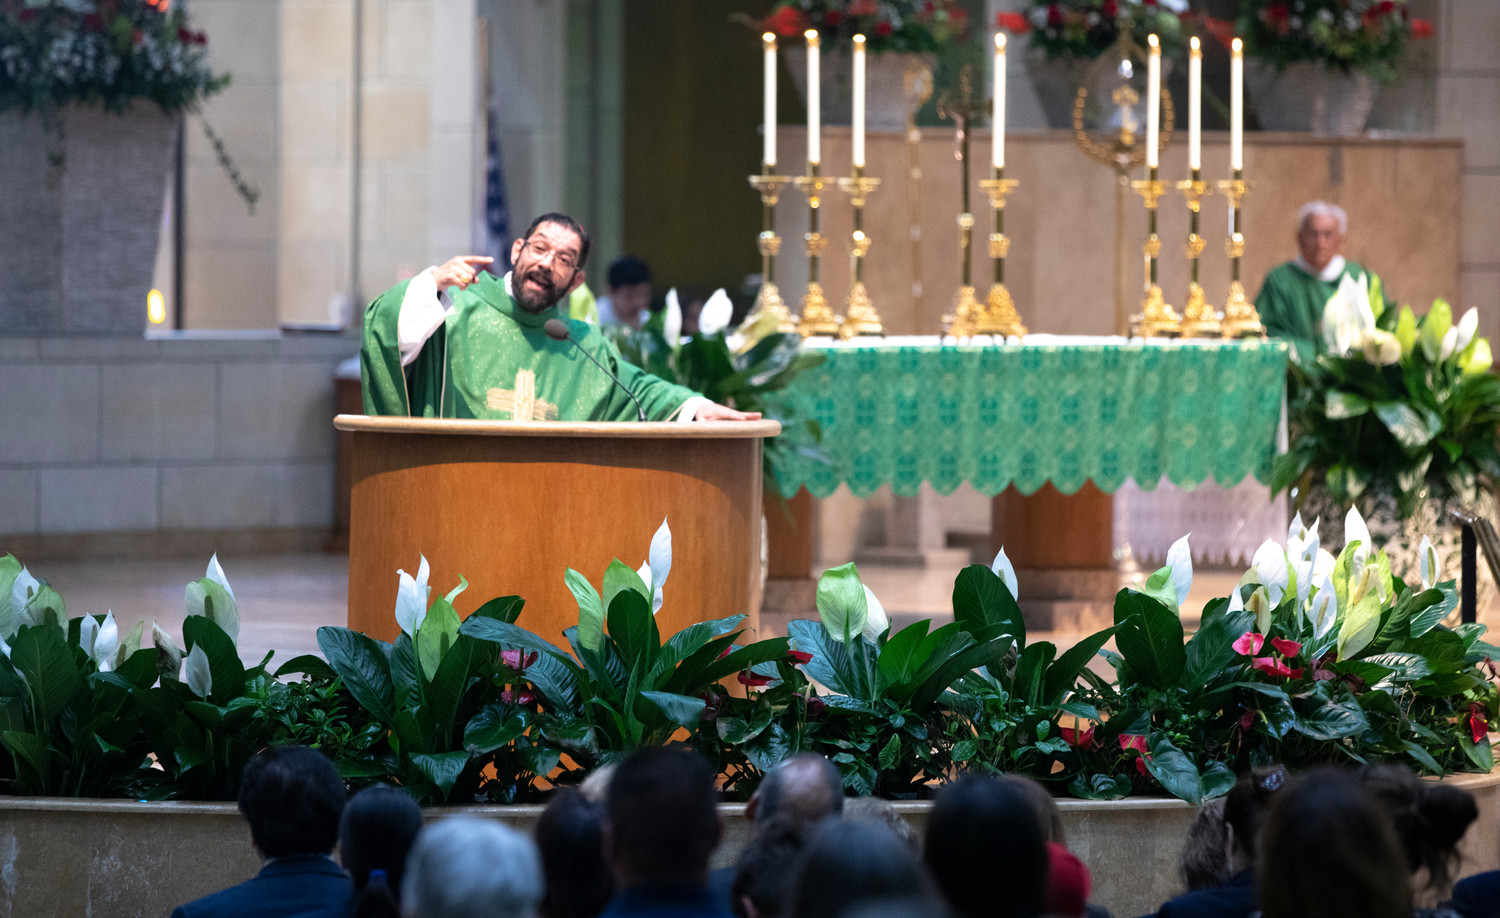 Bishop Daniel E. Flores of Brownsville, Texas, delivers his homily July 1 at the Basilica of Our Lady of San Juan del Valle in San Juan, Texas. A delegation of U.S. bishops concelebrated the Mass at the start of their fact-finding mission about Central American immigrant detention at the U.S.-Mexican border.